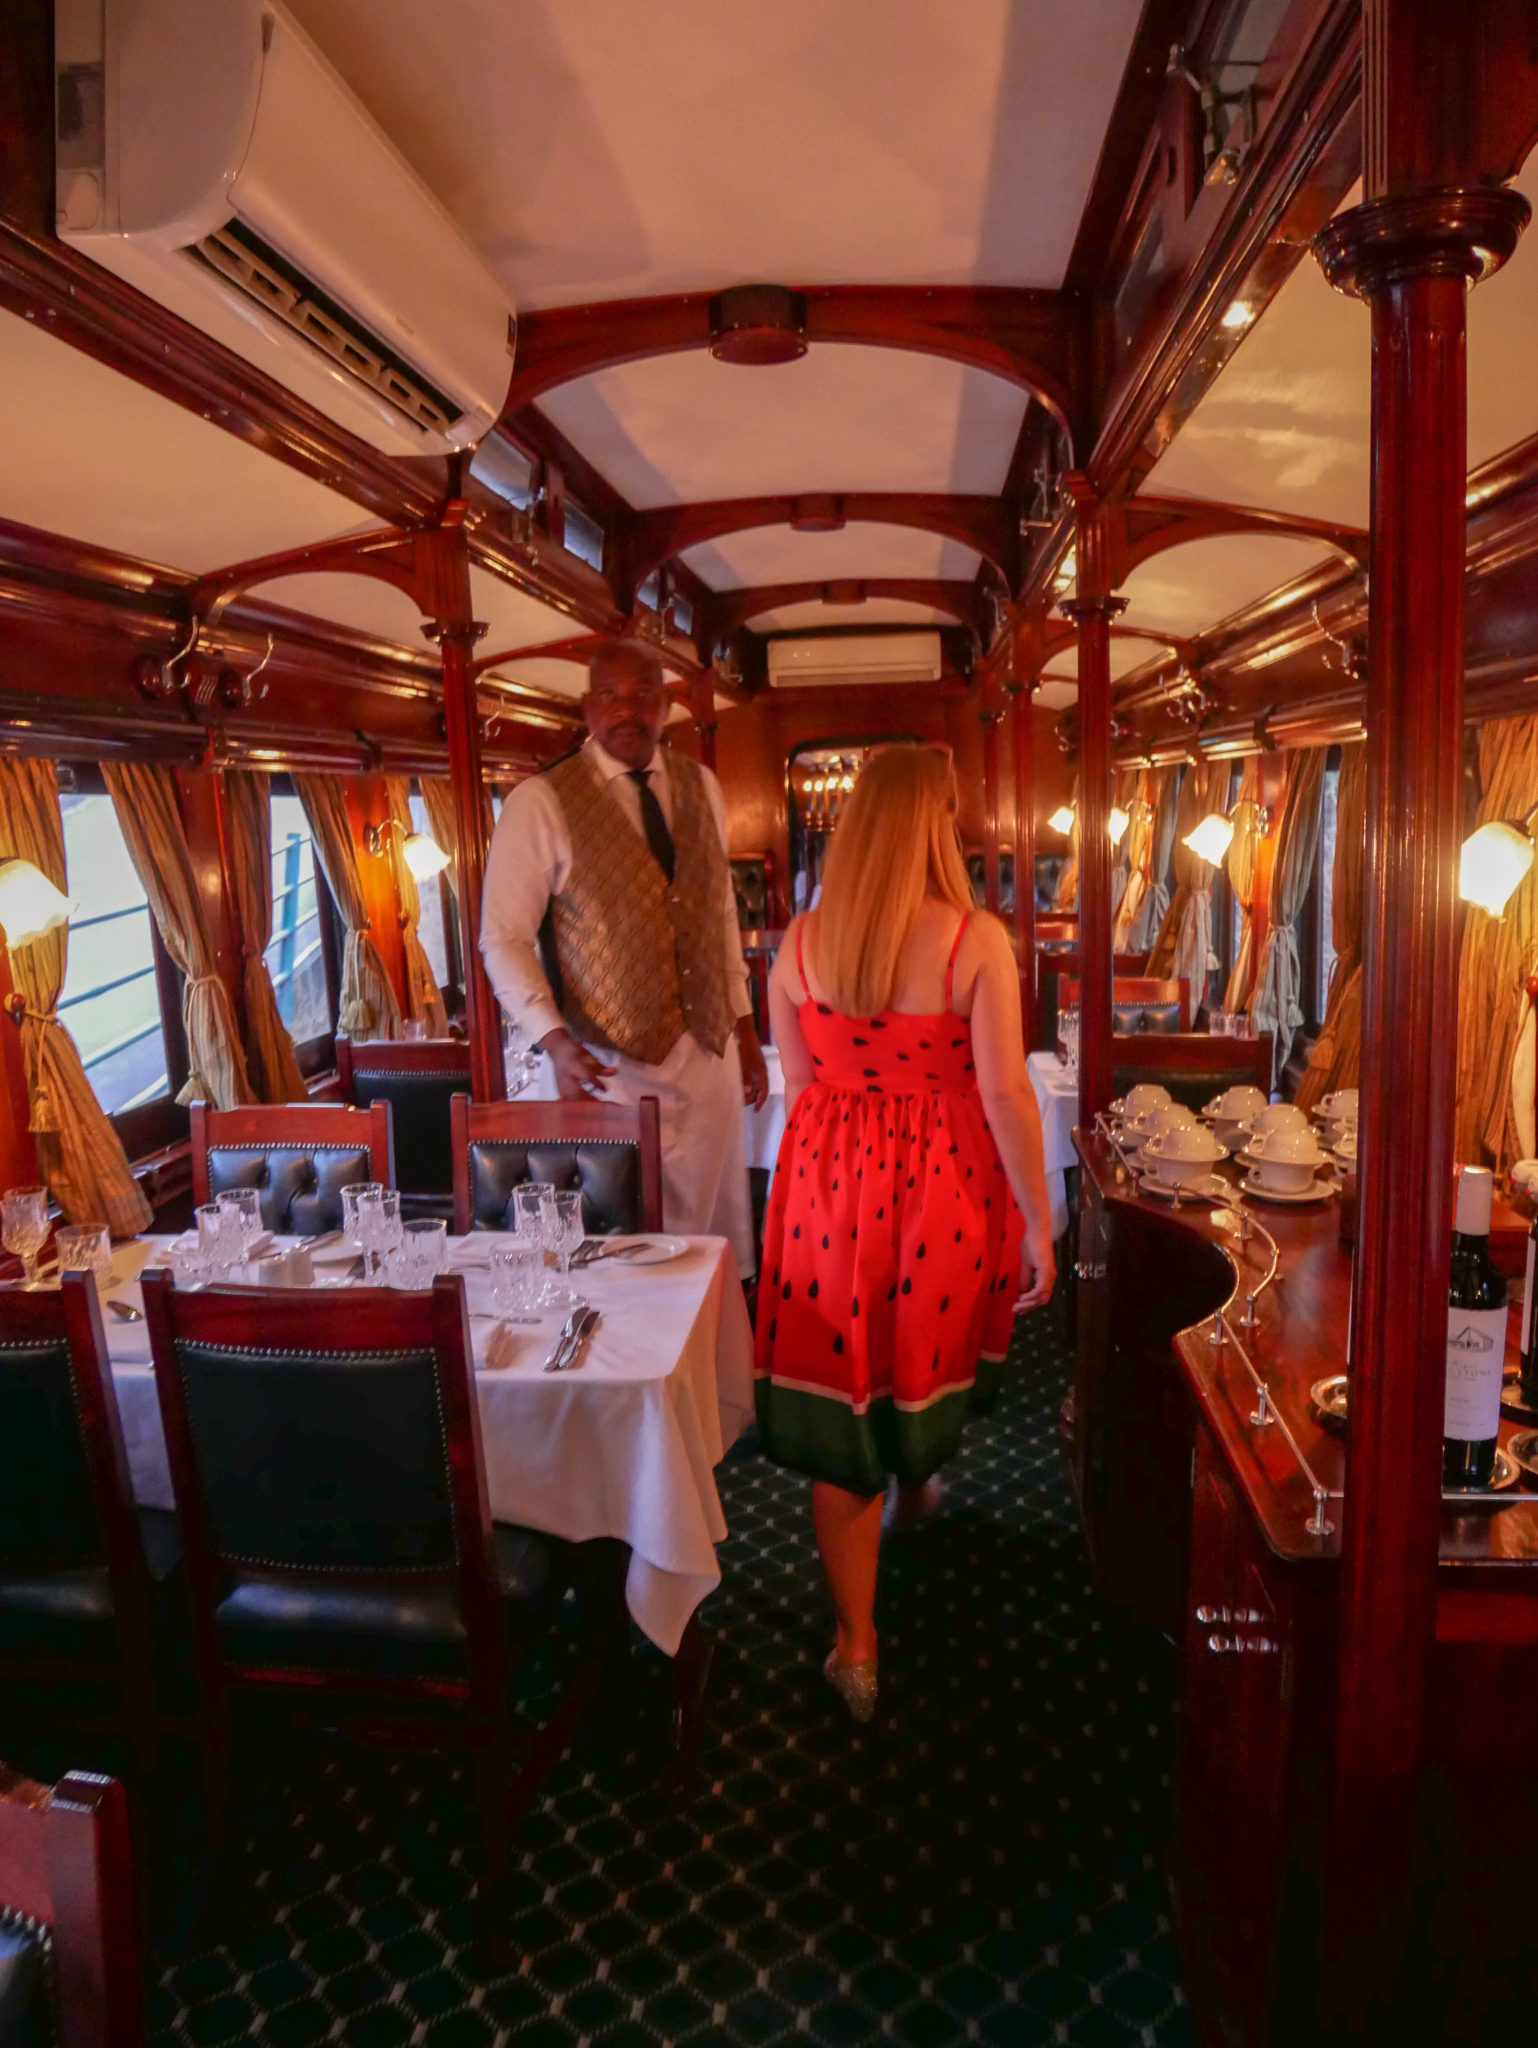 Rosie walks through the Dining Car of the Royal Livingstone Express train